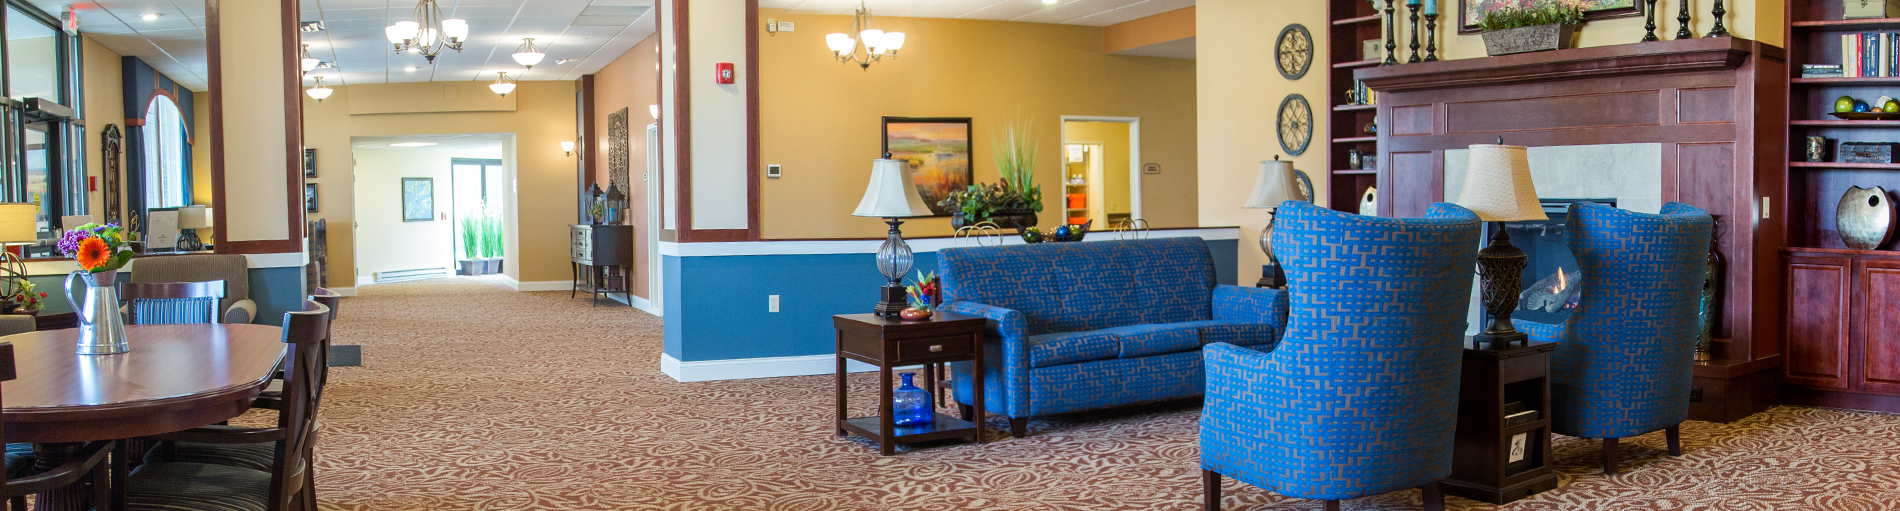 What employment opportunities are available at senior living facilities?